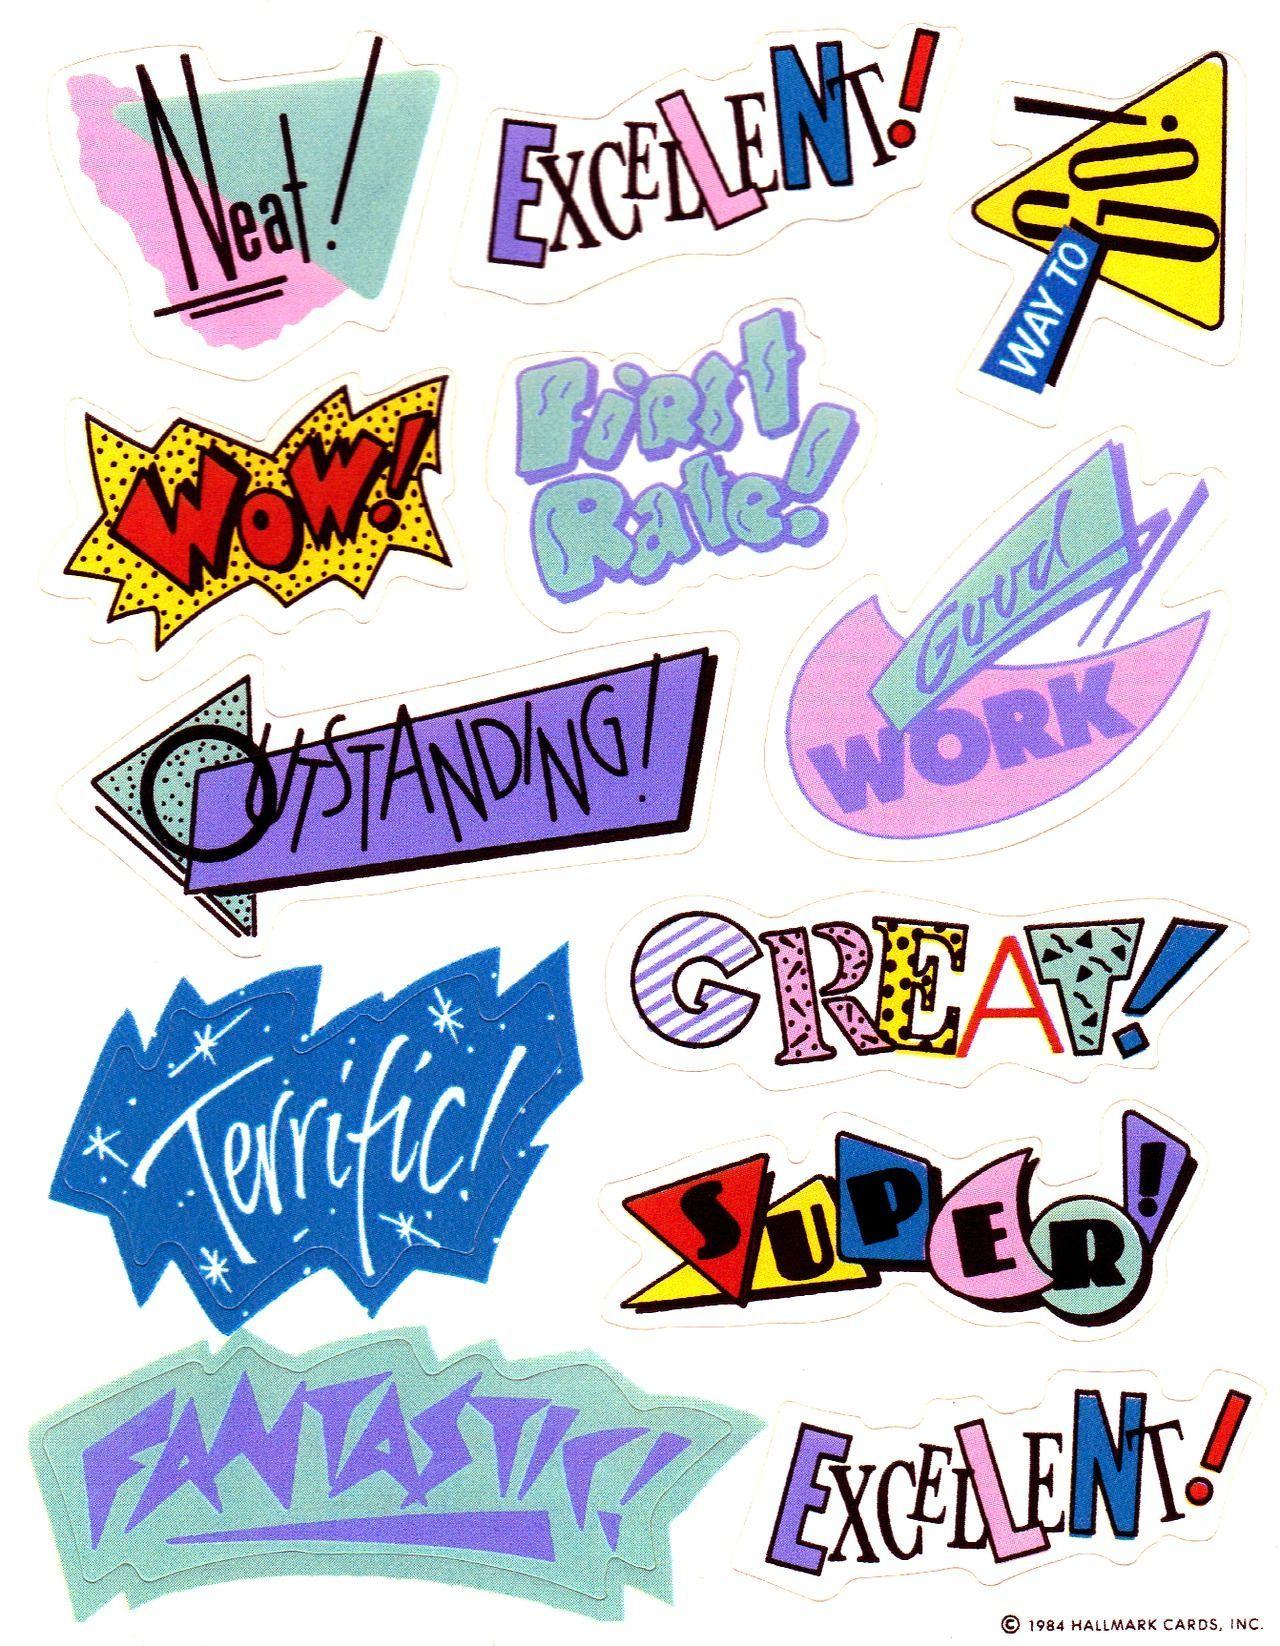 90s Logo - 90's stickers. Design. Typography, Fonts and Logos